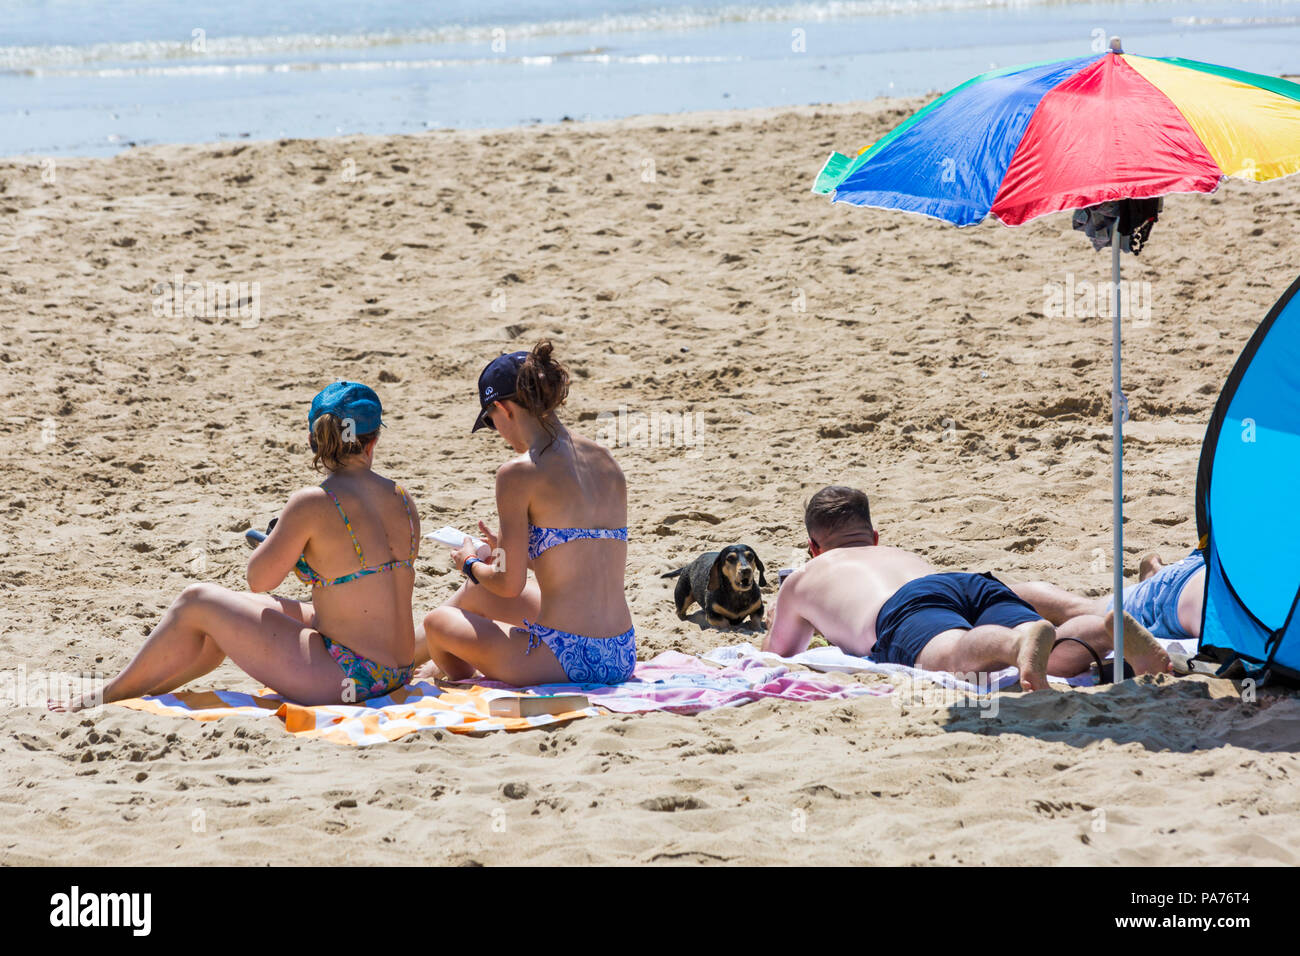 Bournemouth, Dorset, UK. 21st July 2018. UK weather: hot and sunny at Bournemouth beaches, as sunseekers head to the seaside to soak up the sun at the start of the summer holidays. Sunbathing on the beach with dachshund sausage dog. Credit: Carolyn Jenkins/Alamy Live News Stock Photo